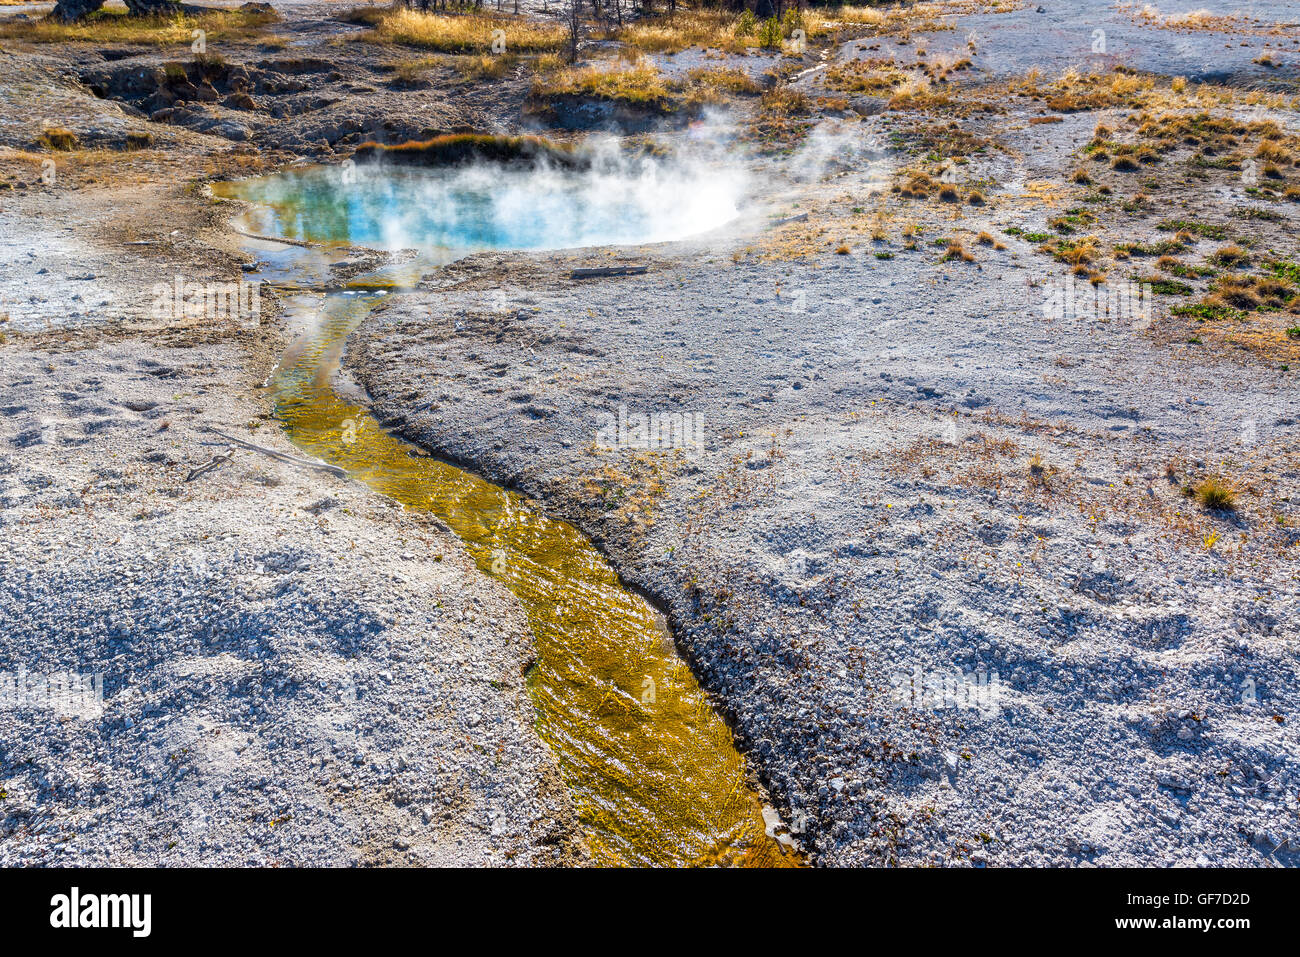 Stream and steaming pool in West Thumb Geyser Basin in Yellowstone National Park Stock Photo